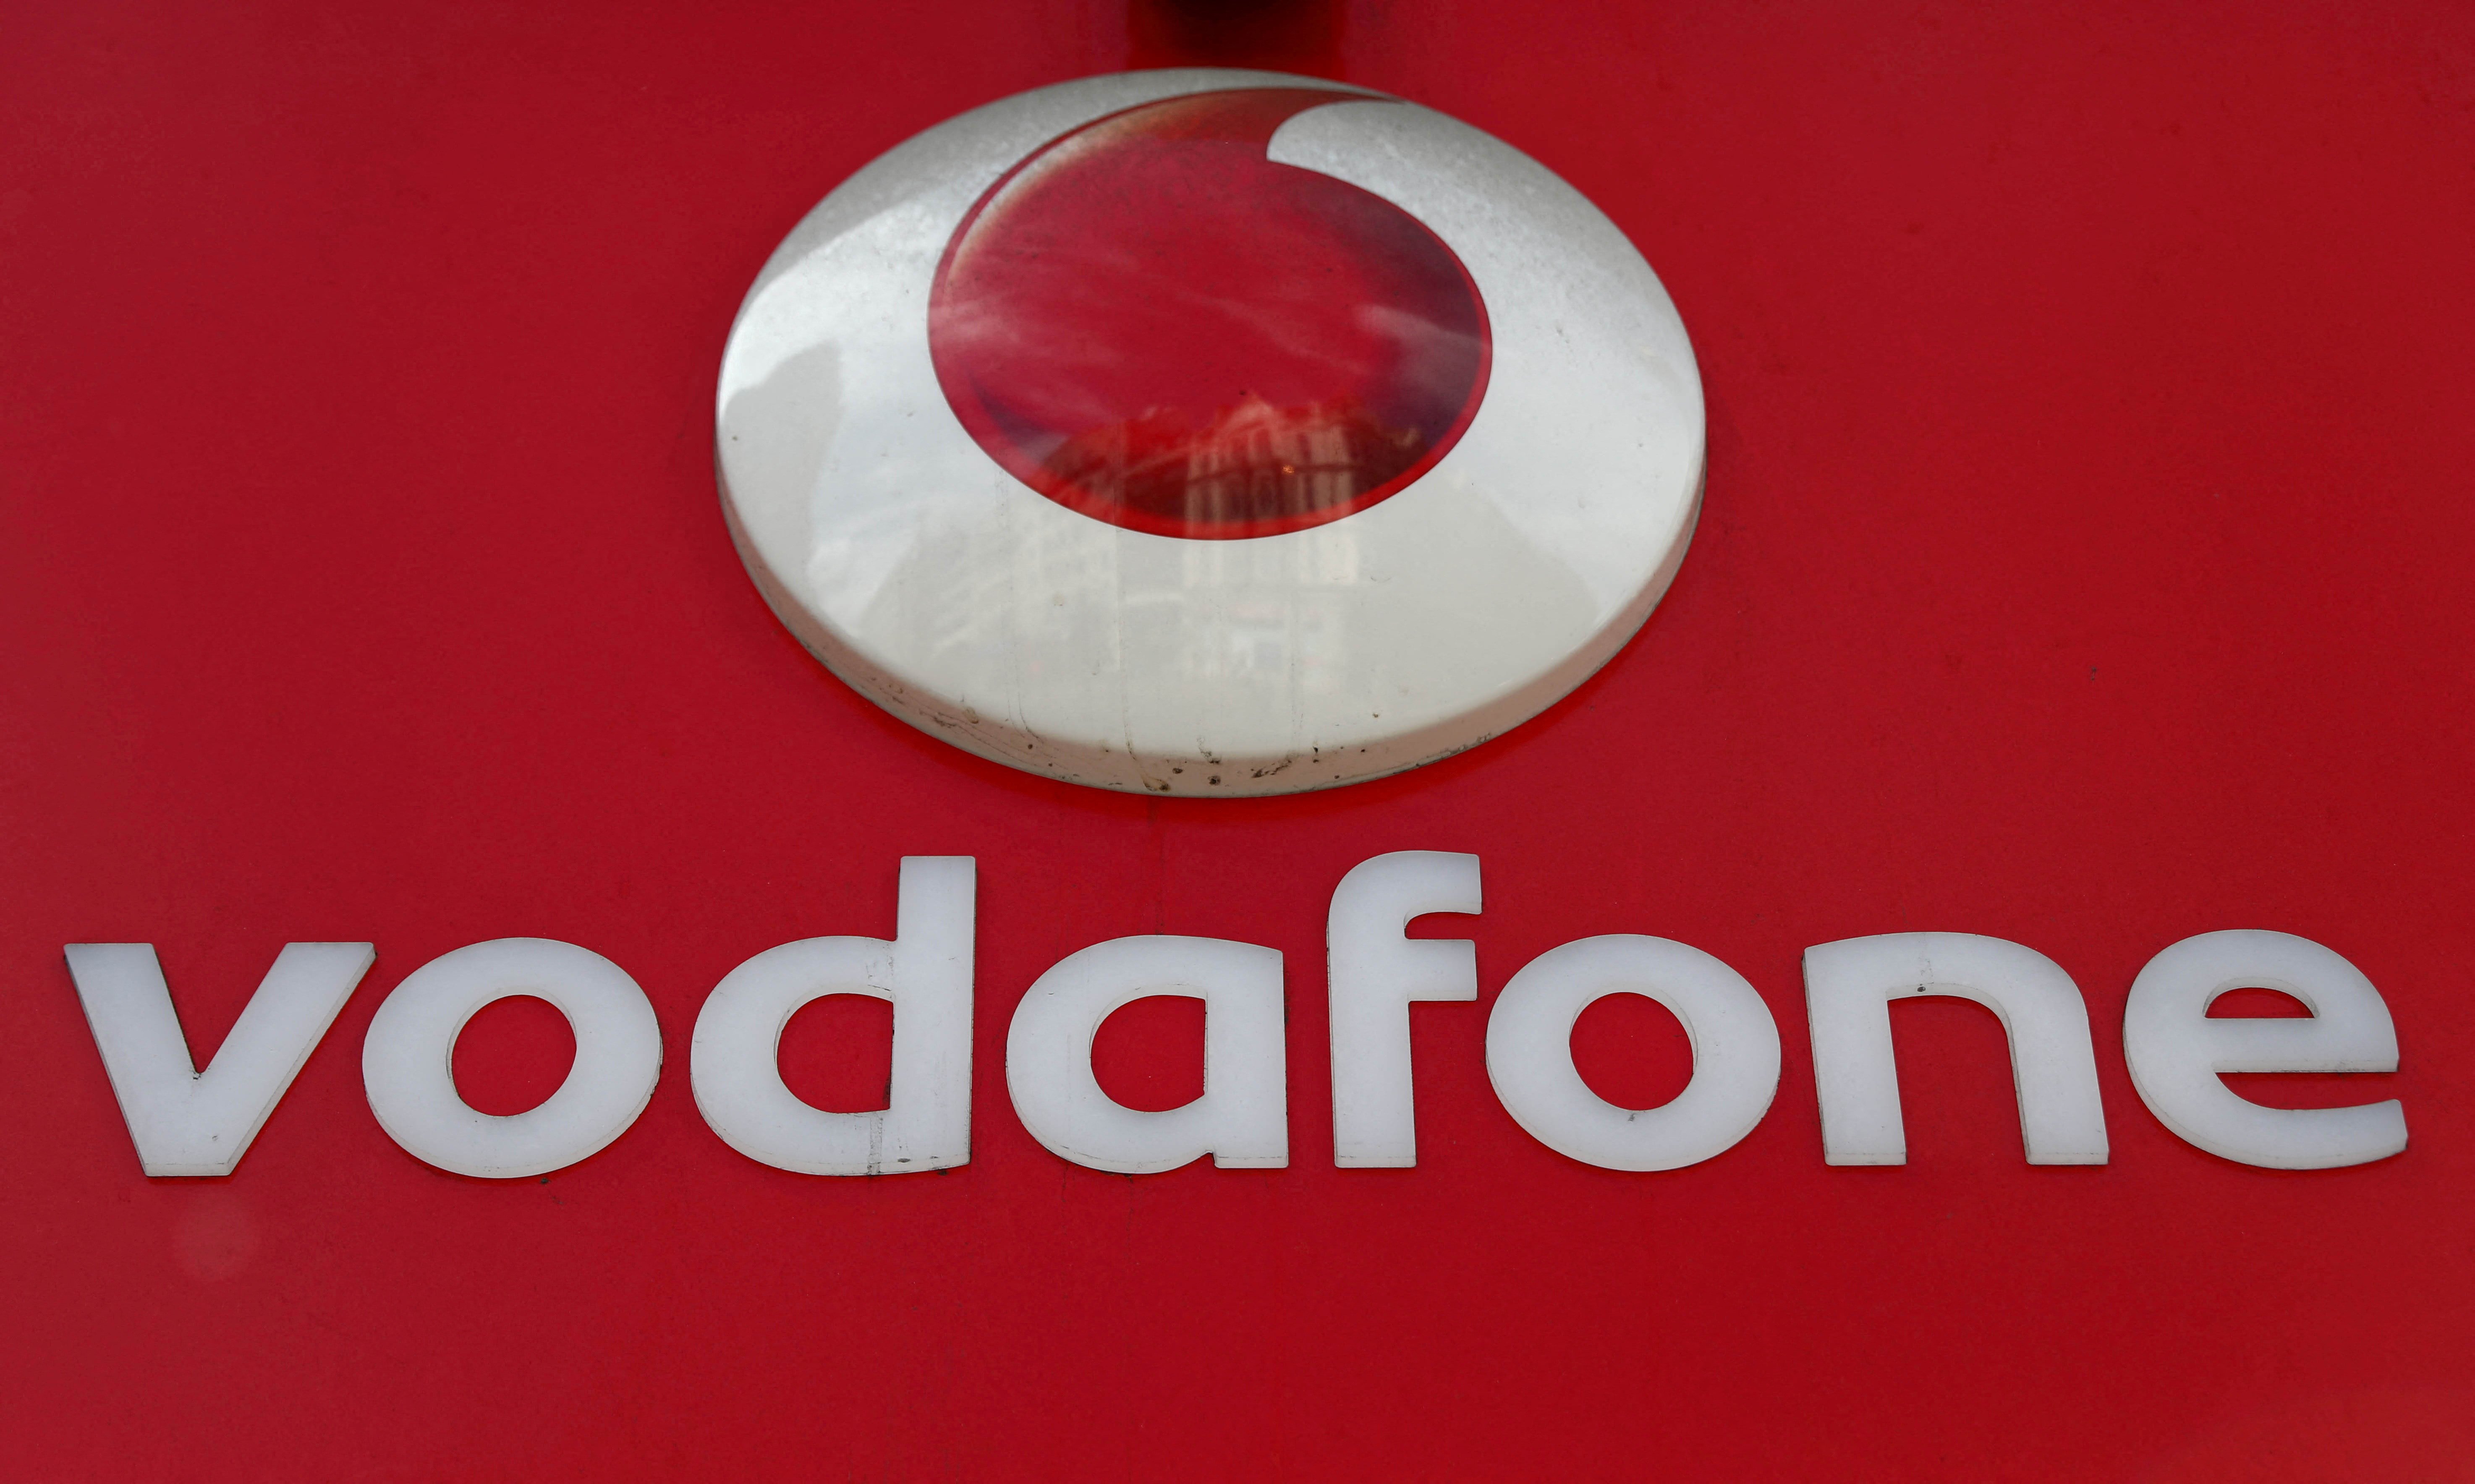 French tycoon Xavier Niel builds £750m stake in Vodafone